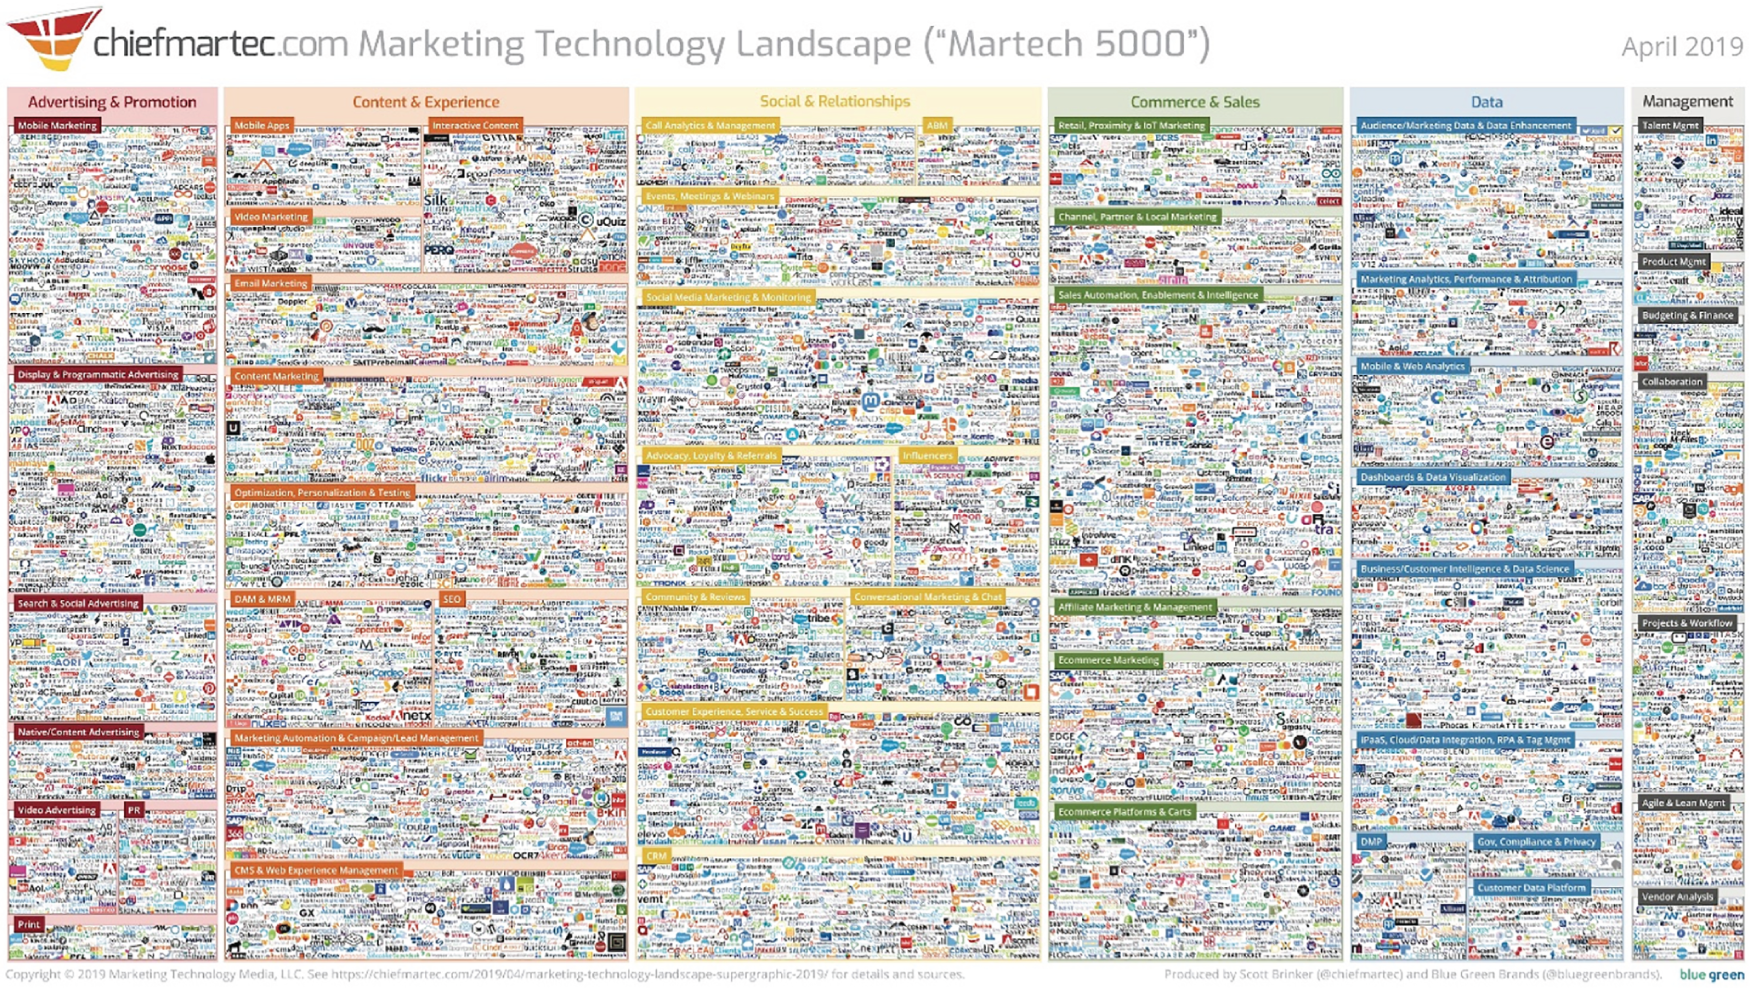 Depiction of the Martech 5000.